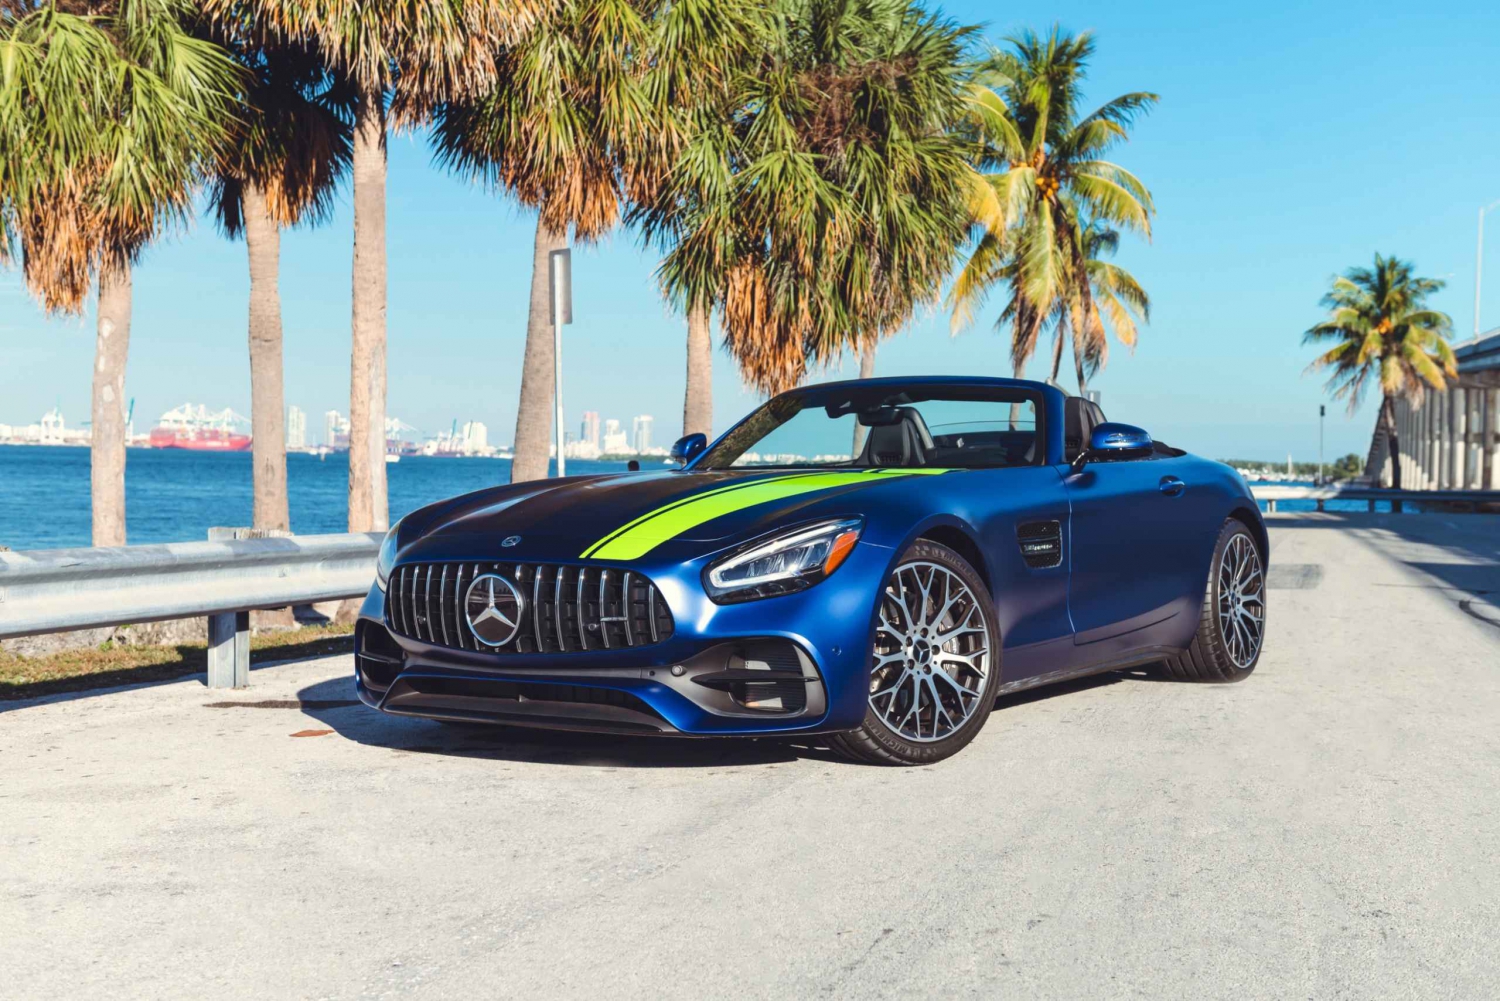 Miami: Mercedes Benz AMG GT Driving Experience